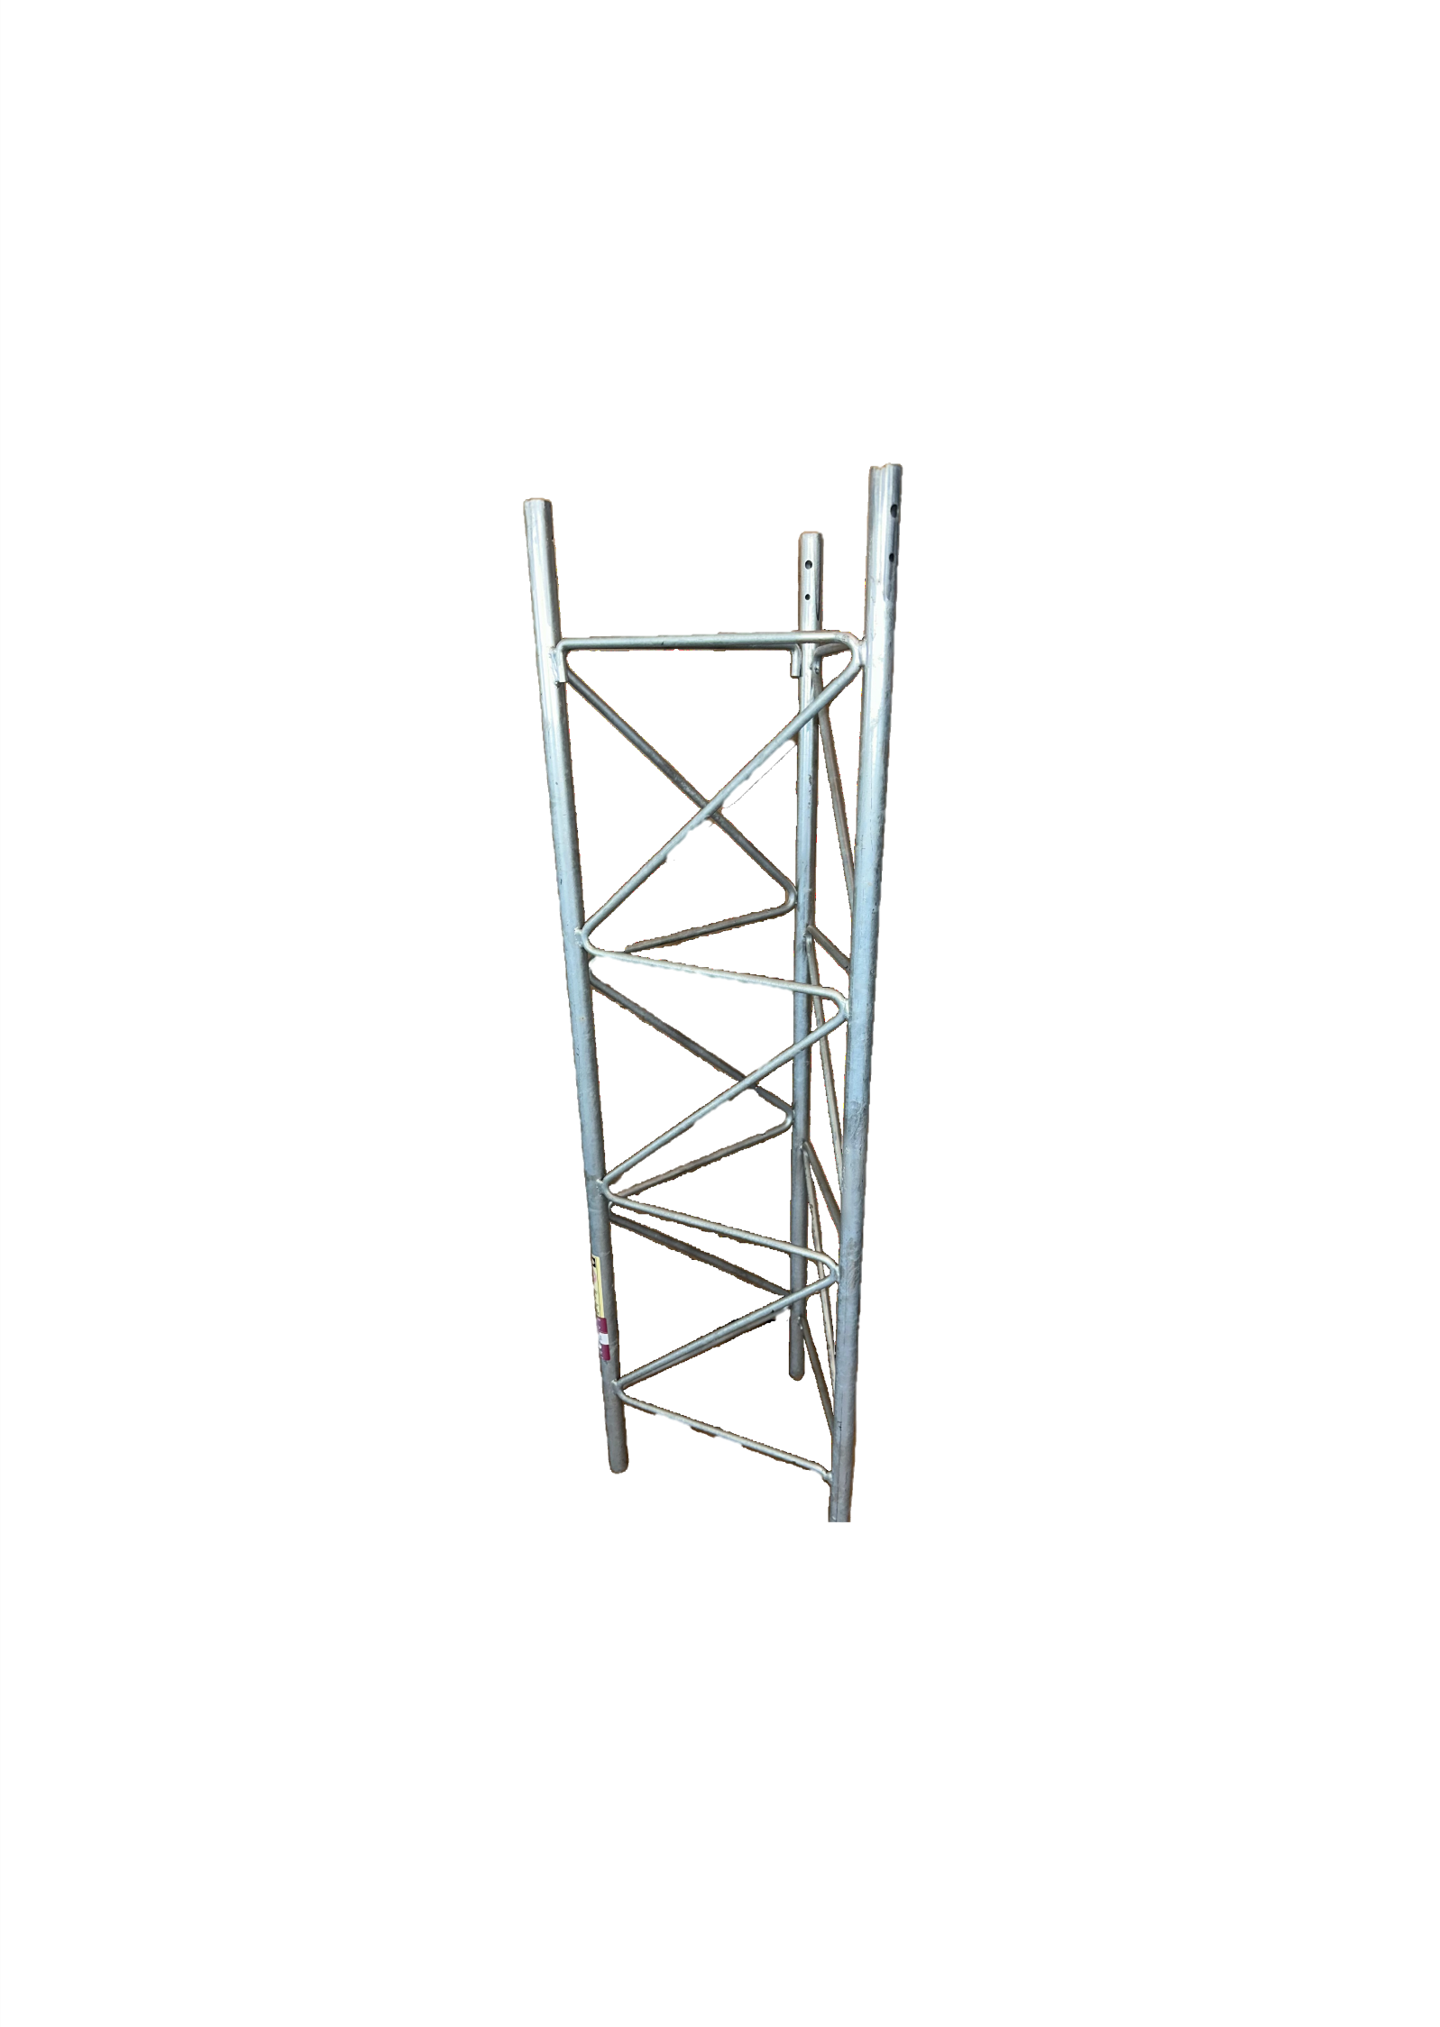 Amerite 45 5 foot Tower Base Section